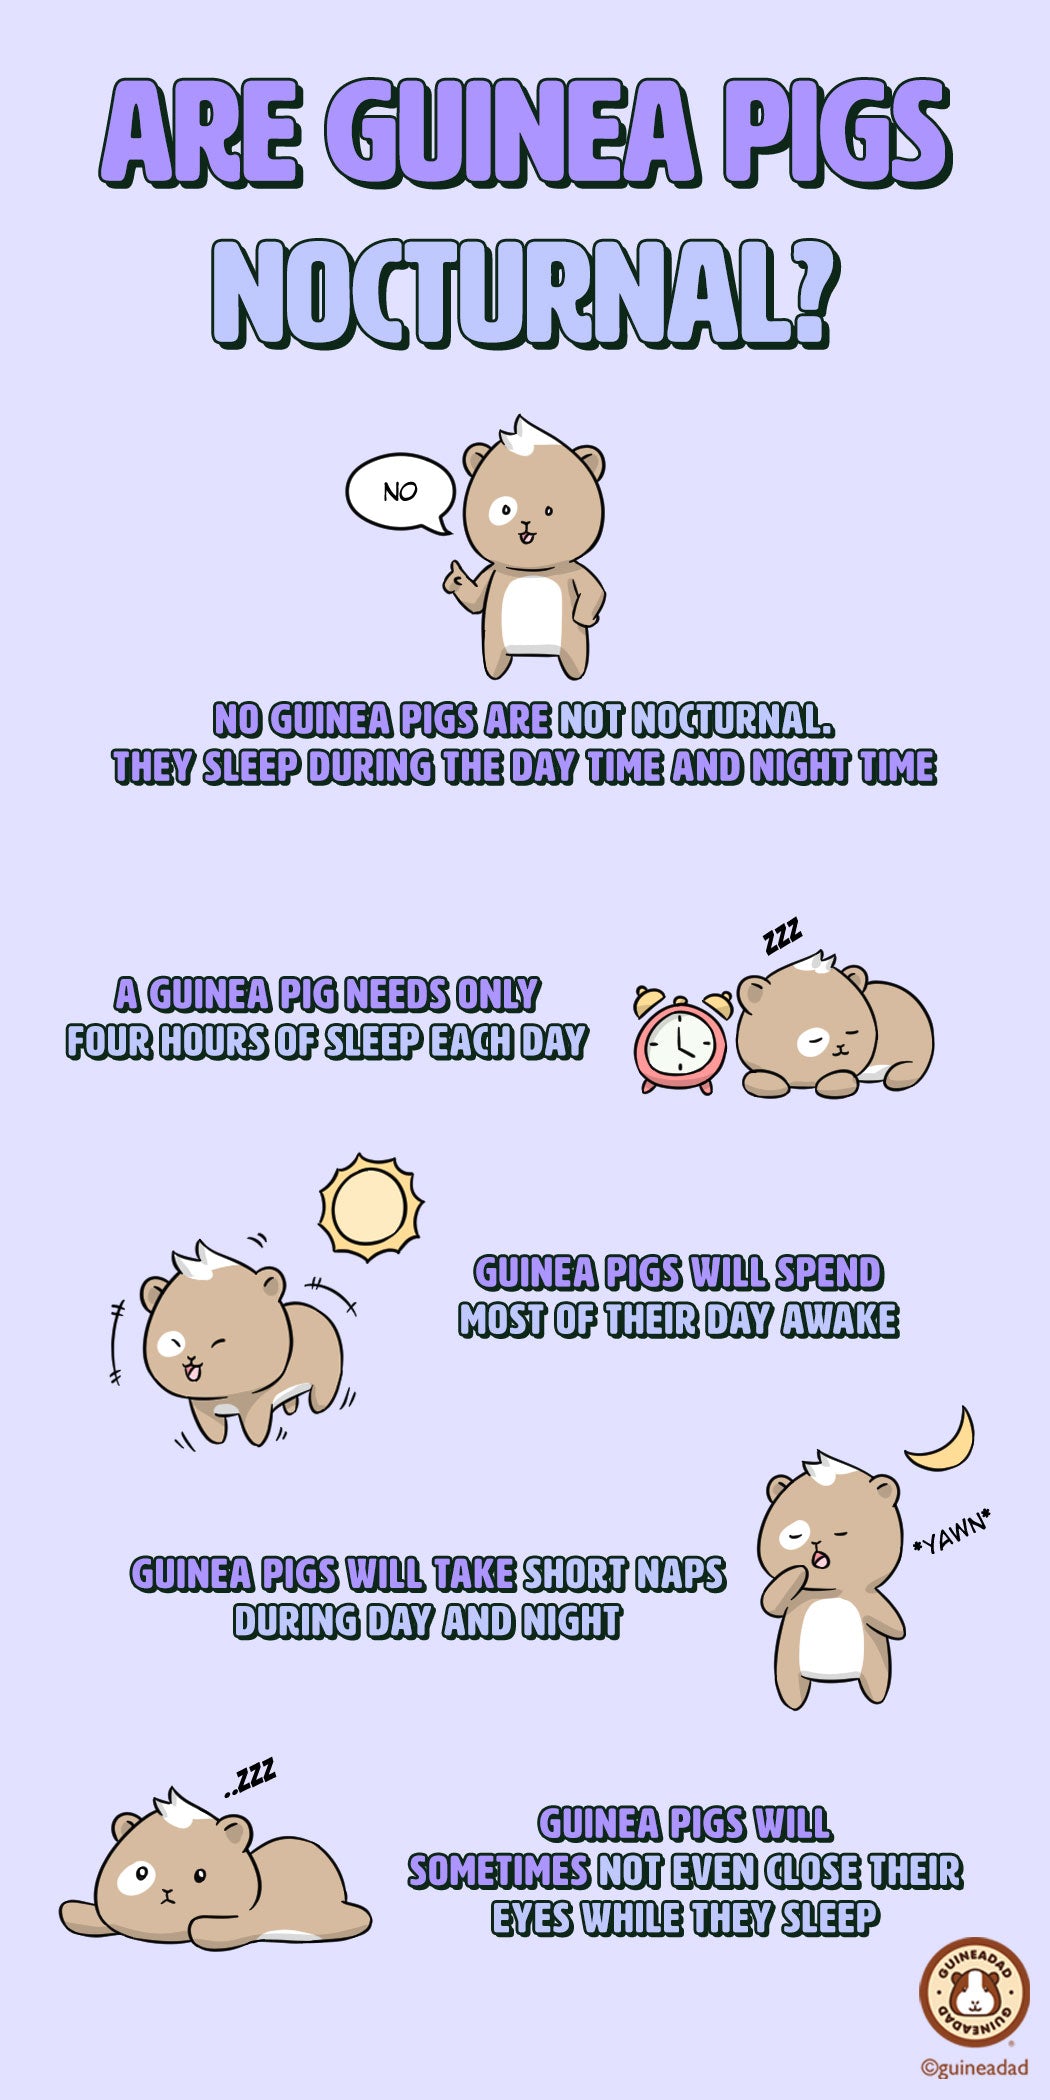 Are guinea pigs nocturnal?